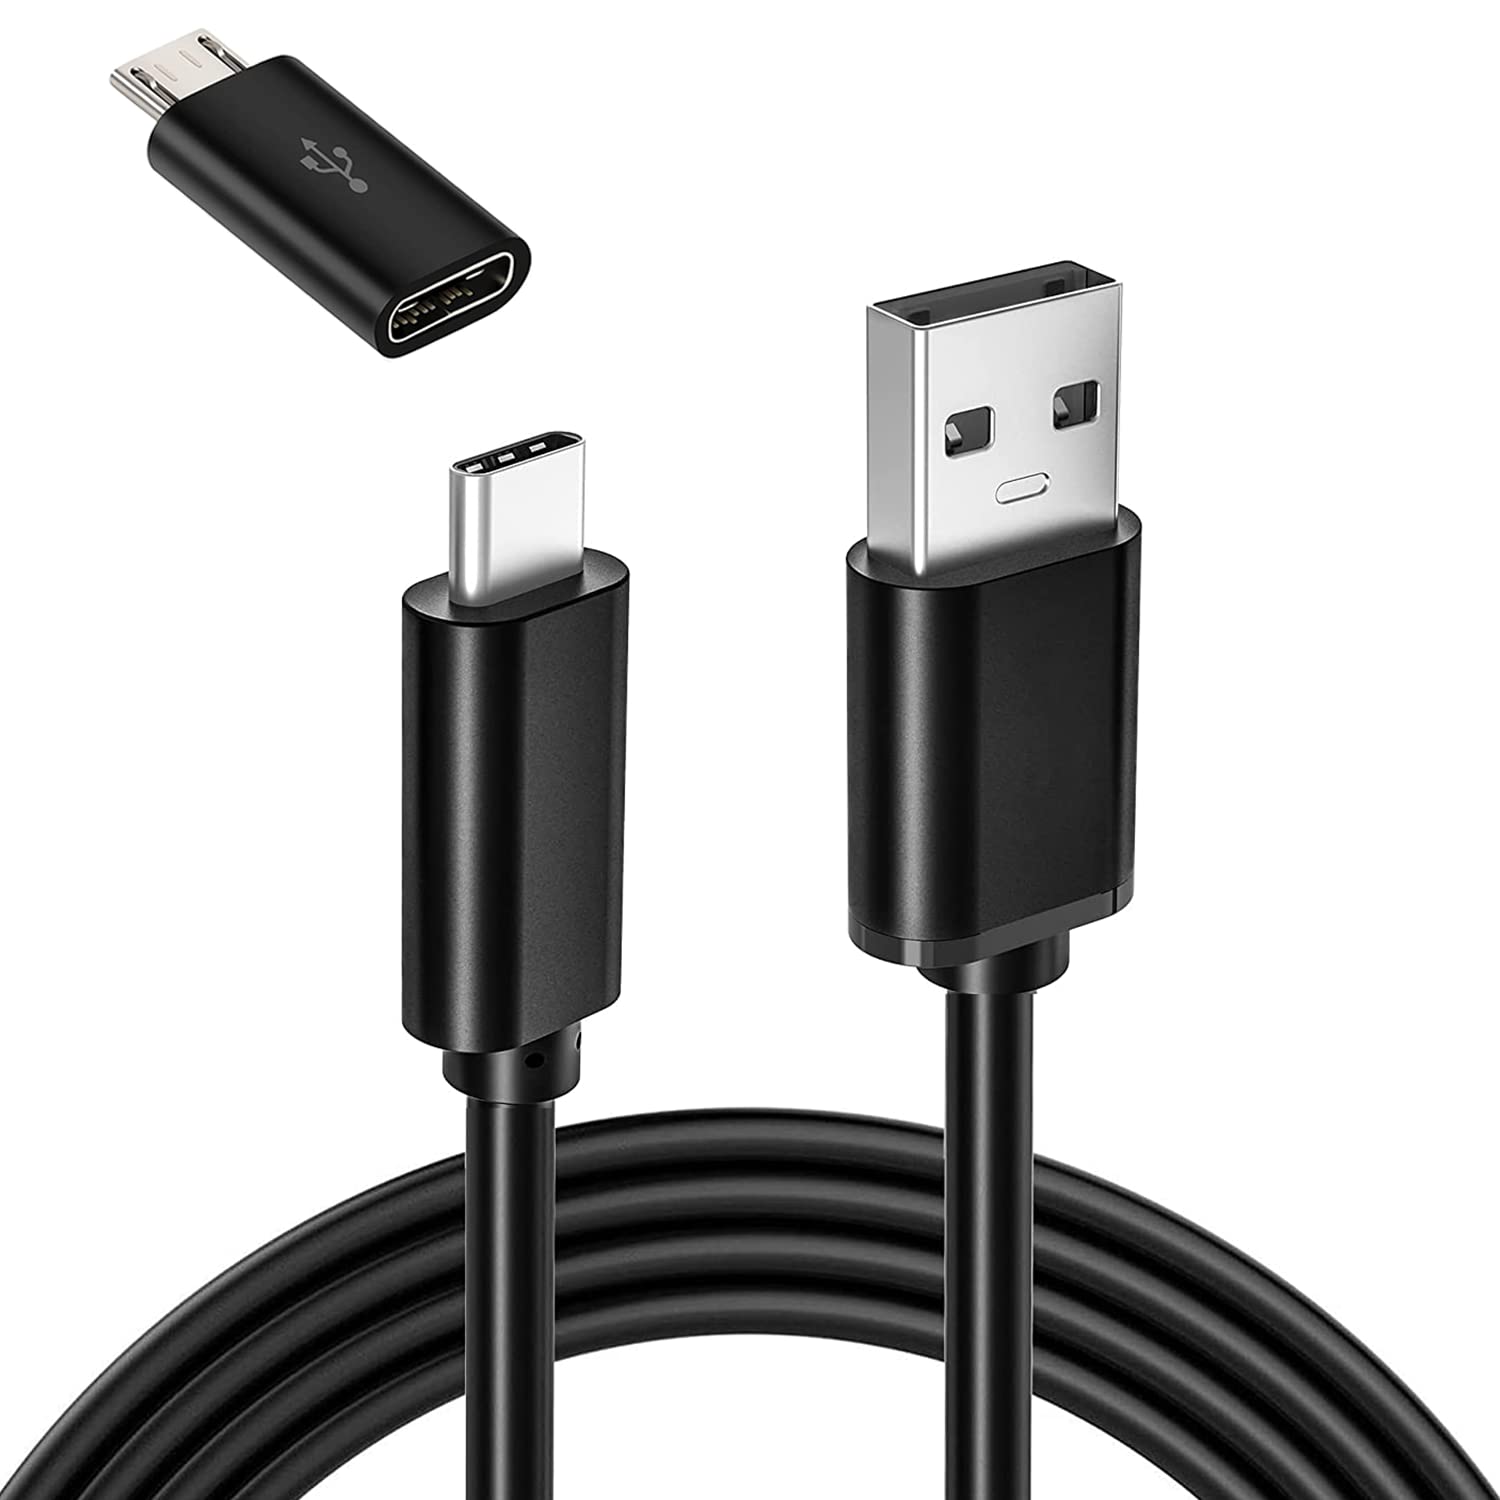 Kindle charging cable